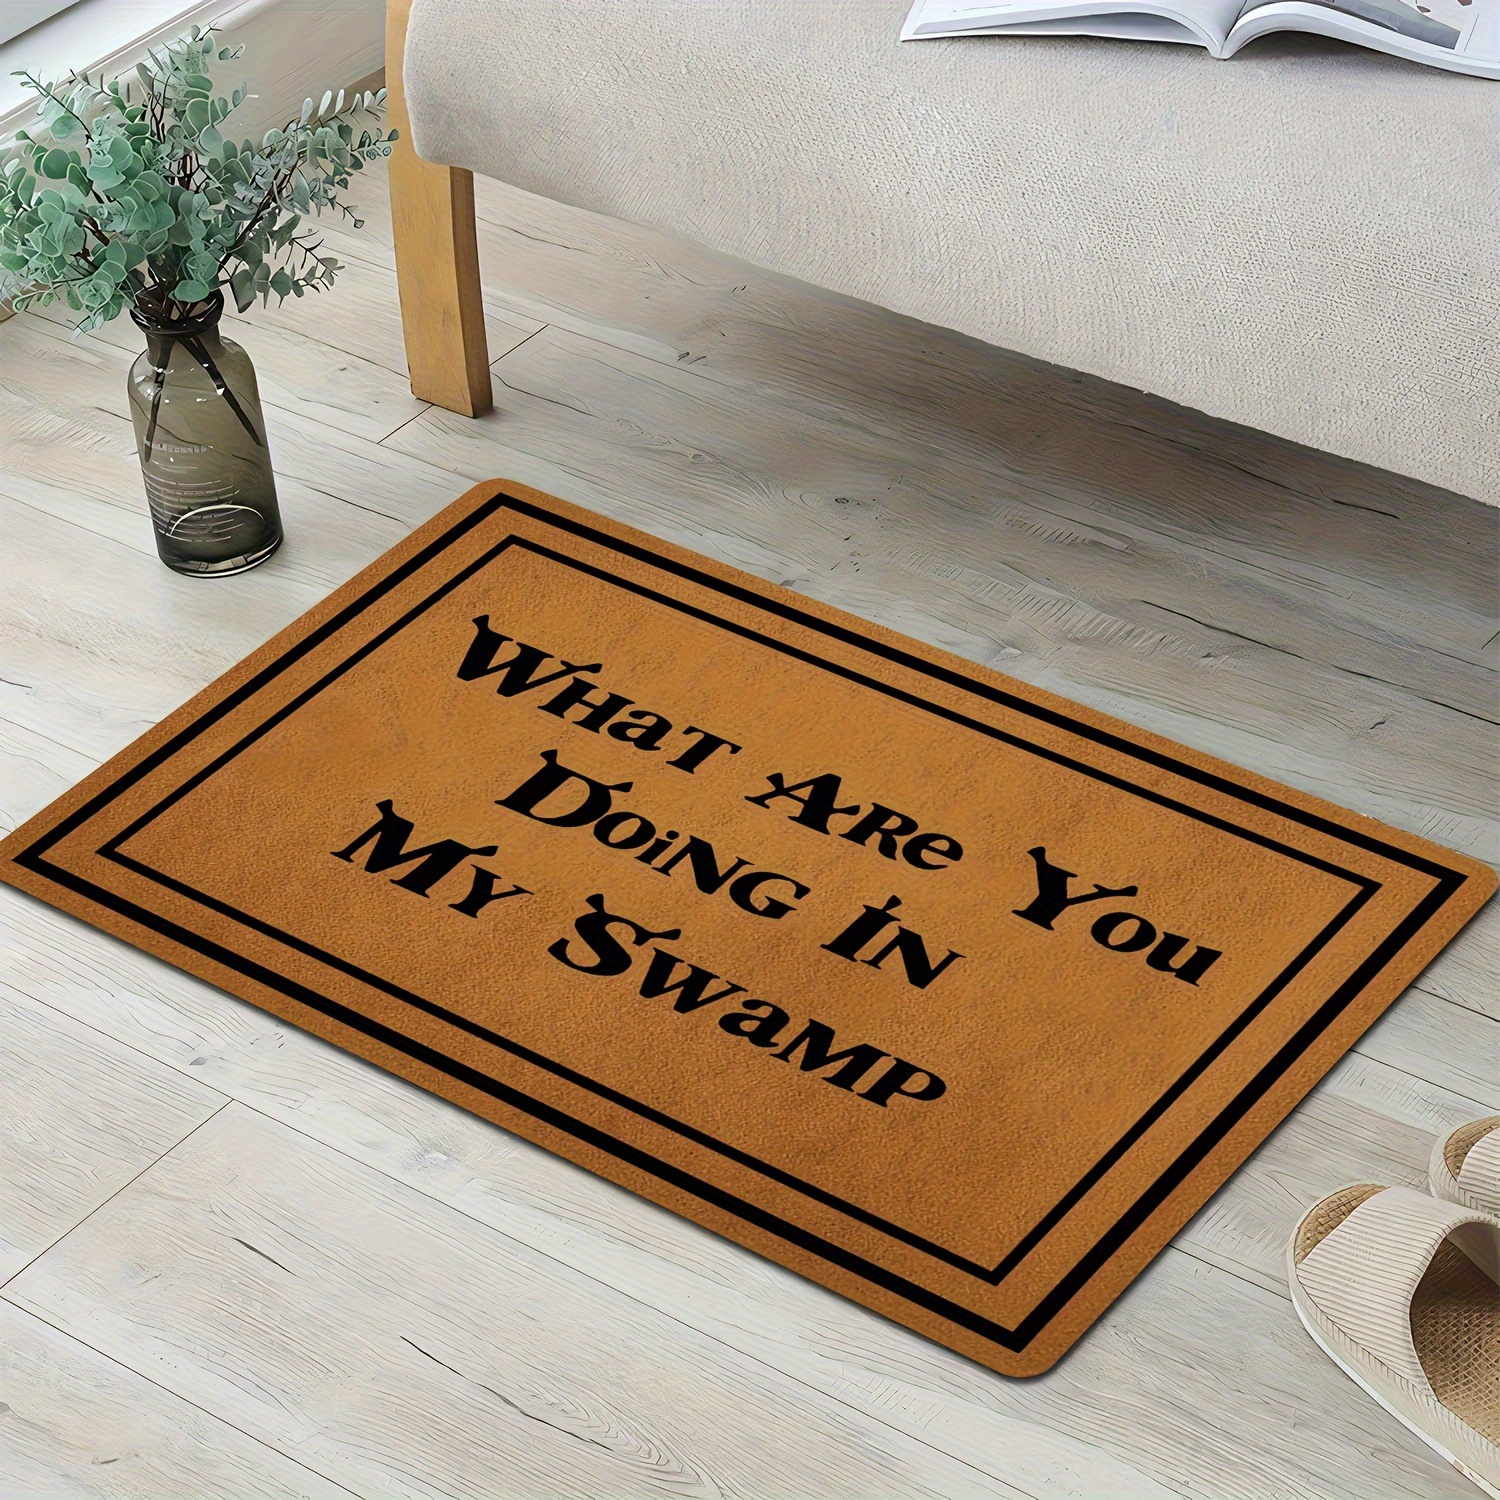 

1pc "what Are You Doing In My Swamp" Welcome Doormat - Machine Washable, Rectangle, Non-slip Rubber Backing, Polyester Fiber, Perfect For Entryway And High Traffic Areas